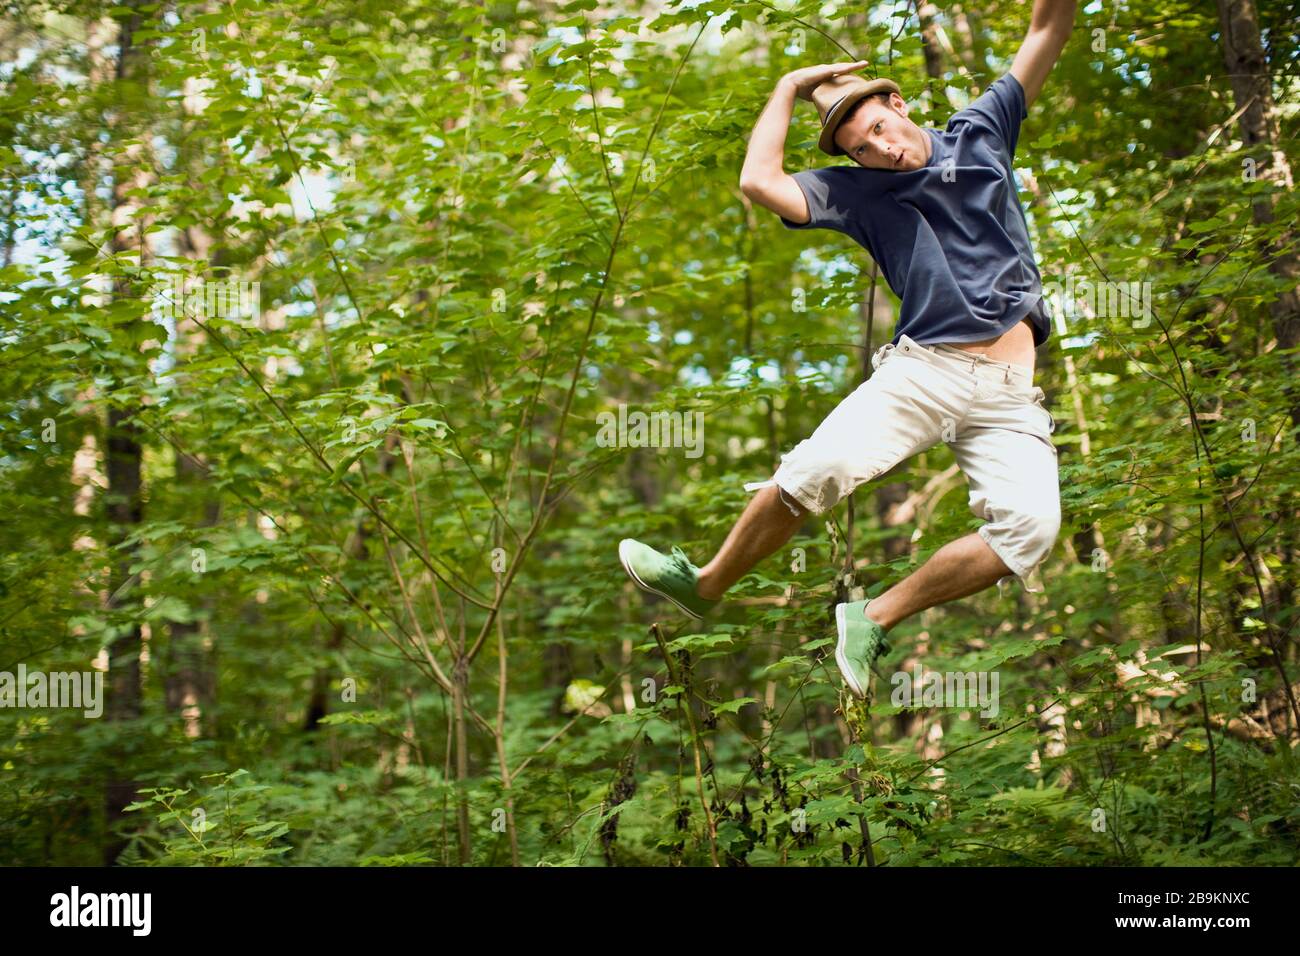 Young man jumping in midair in a forest Stock Photo